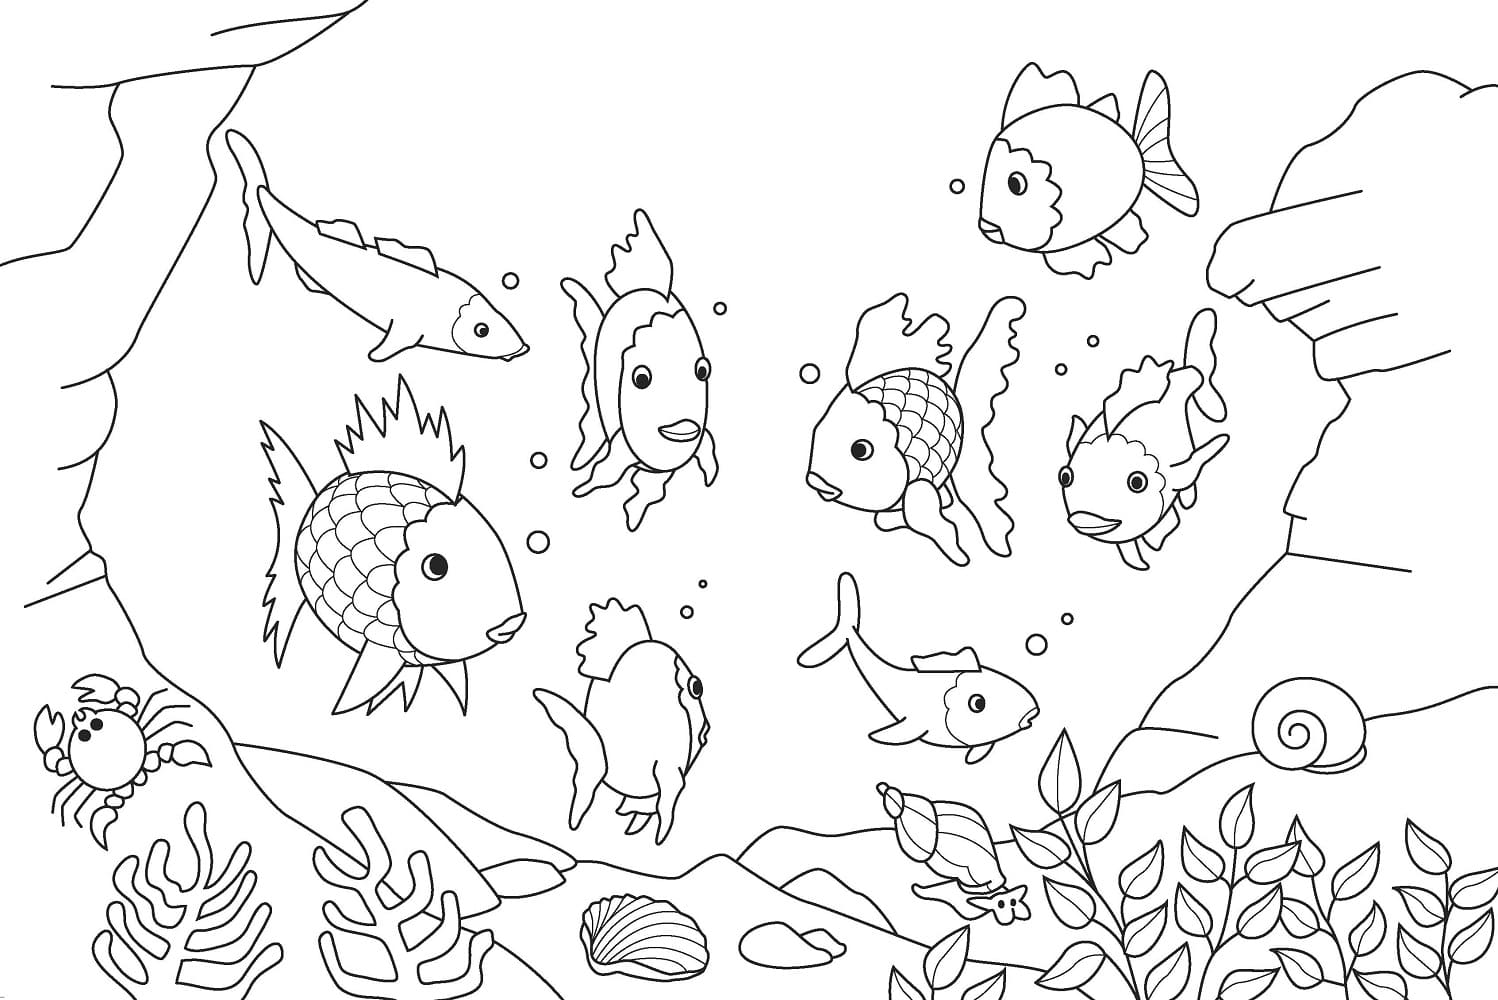 Beaux Poissons coloring page